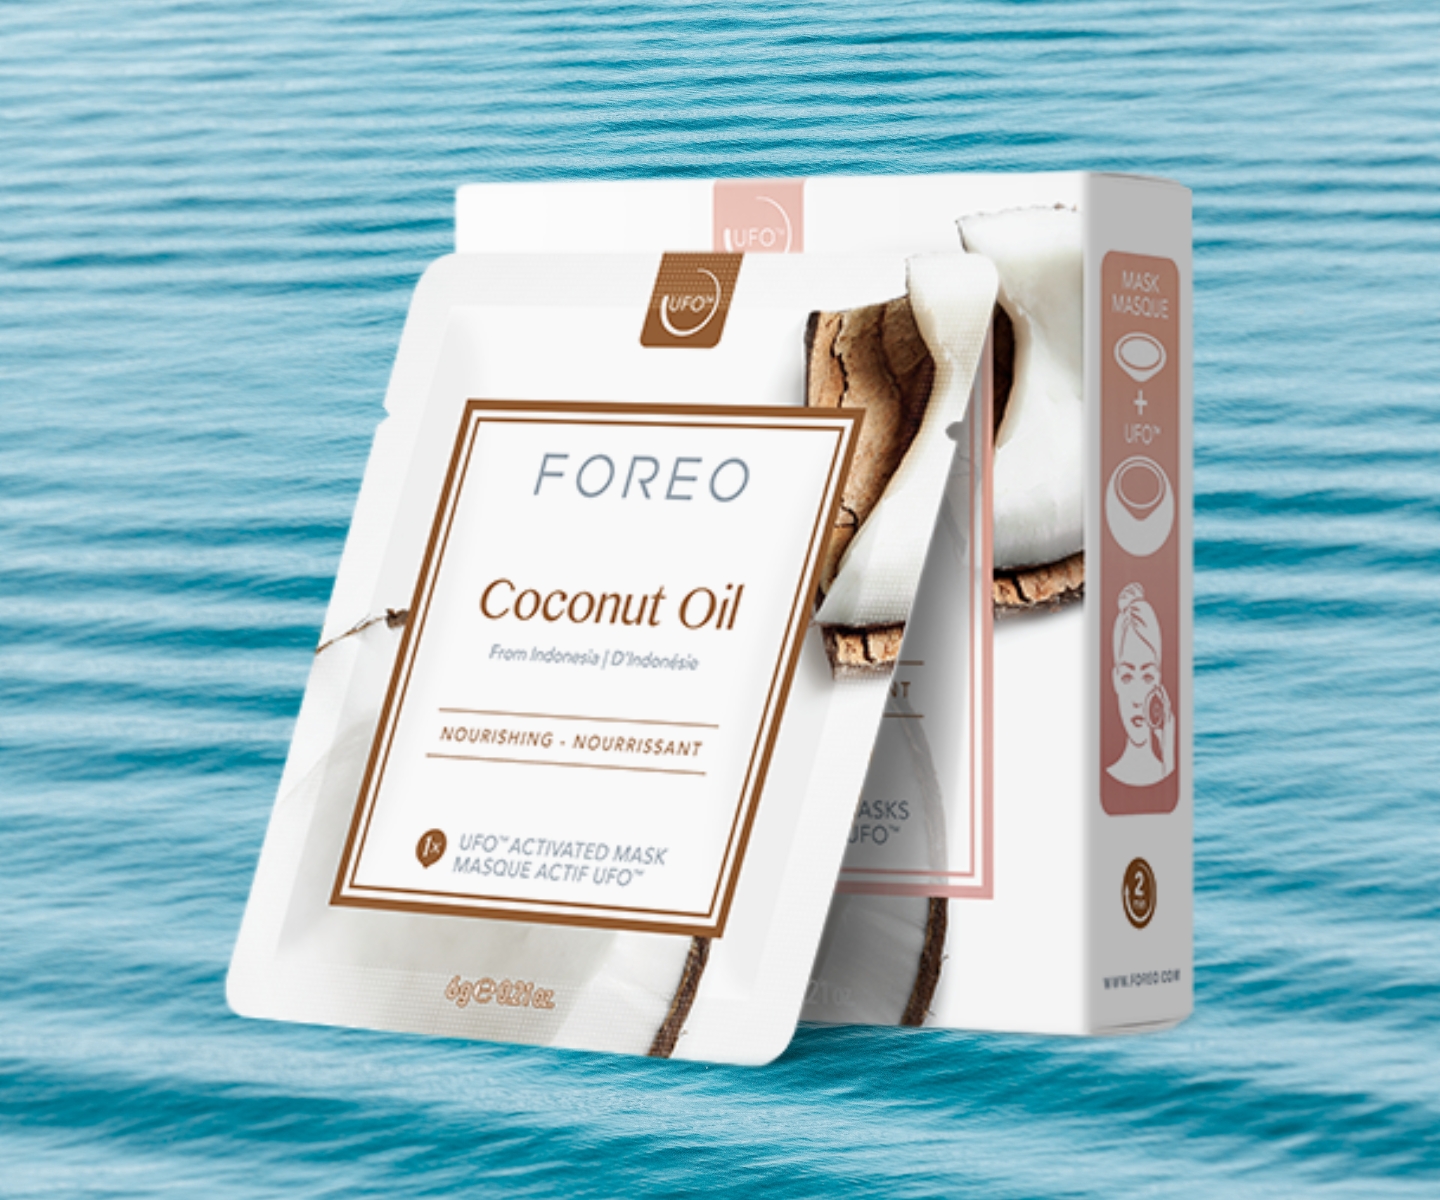 Foreo Farm to Face Sheet Mask - Coconut Oil